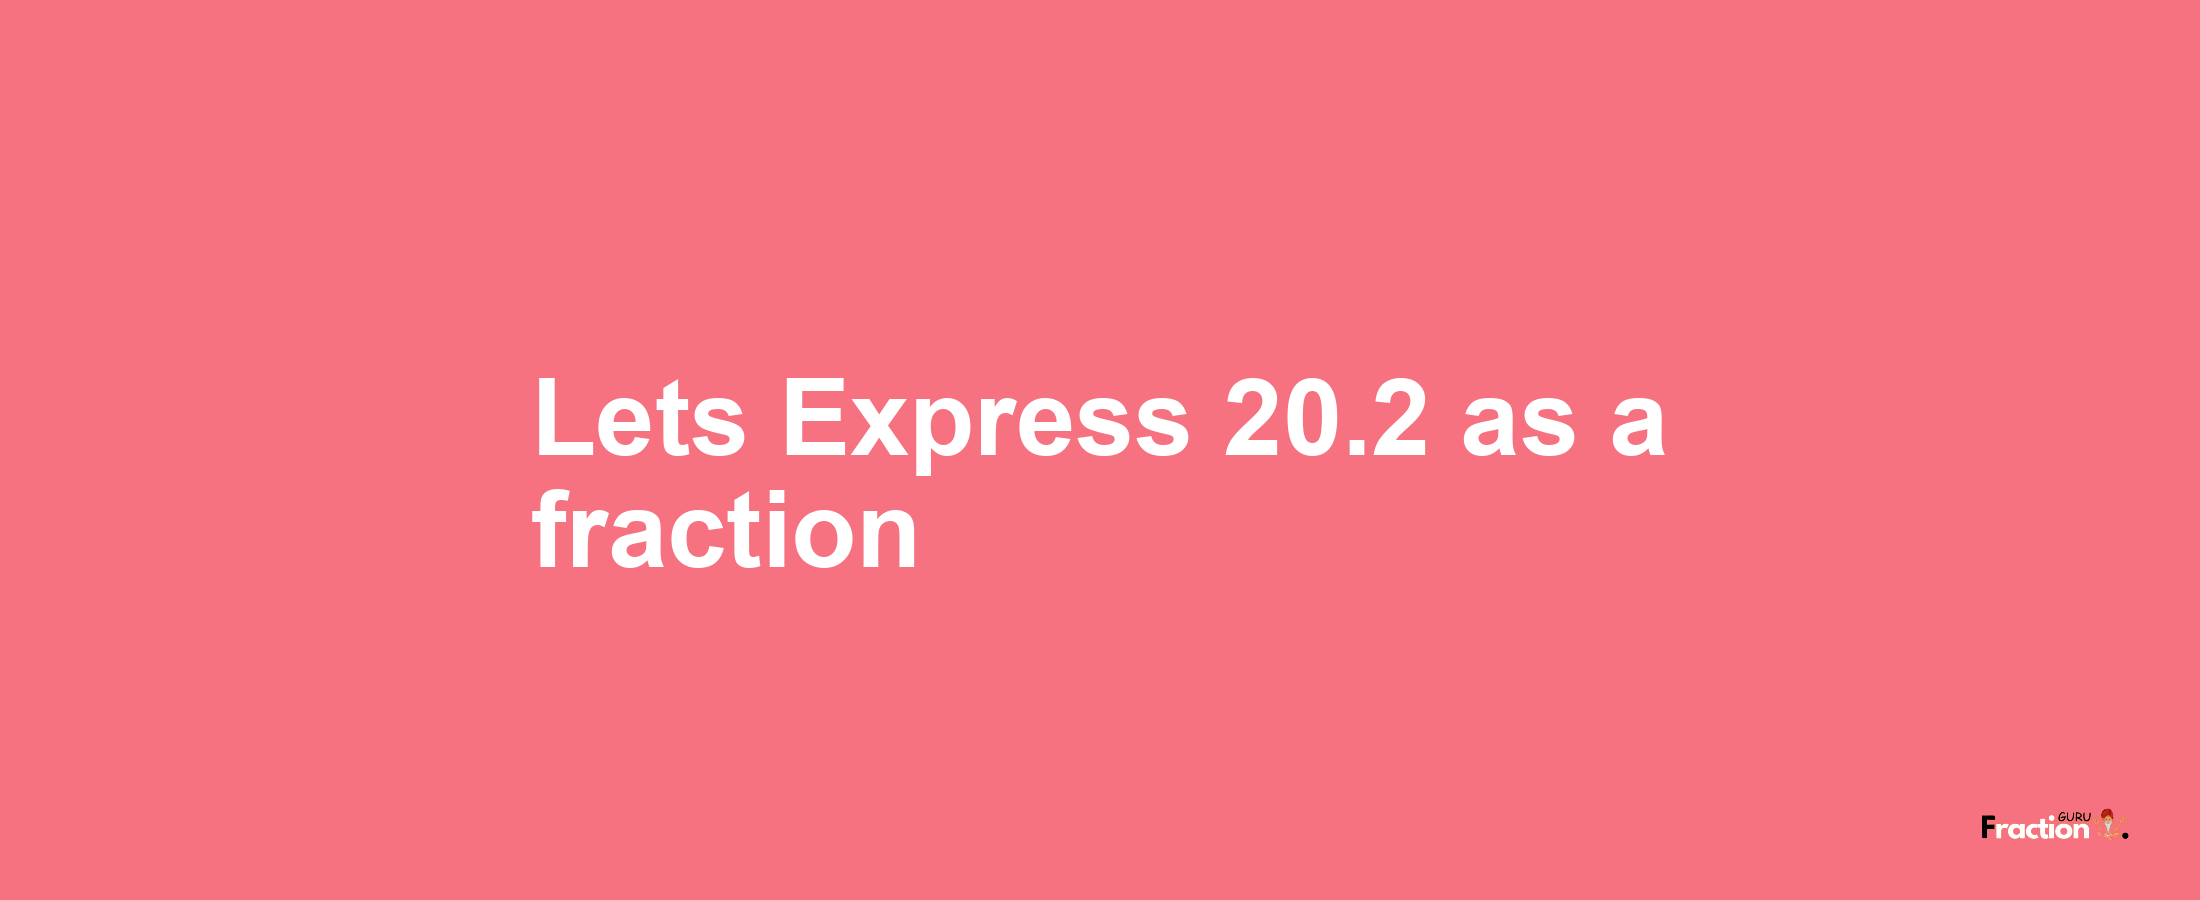 Lets Express 20.2 as afraction